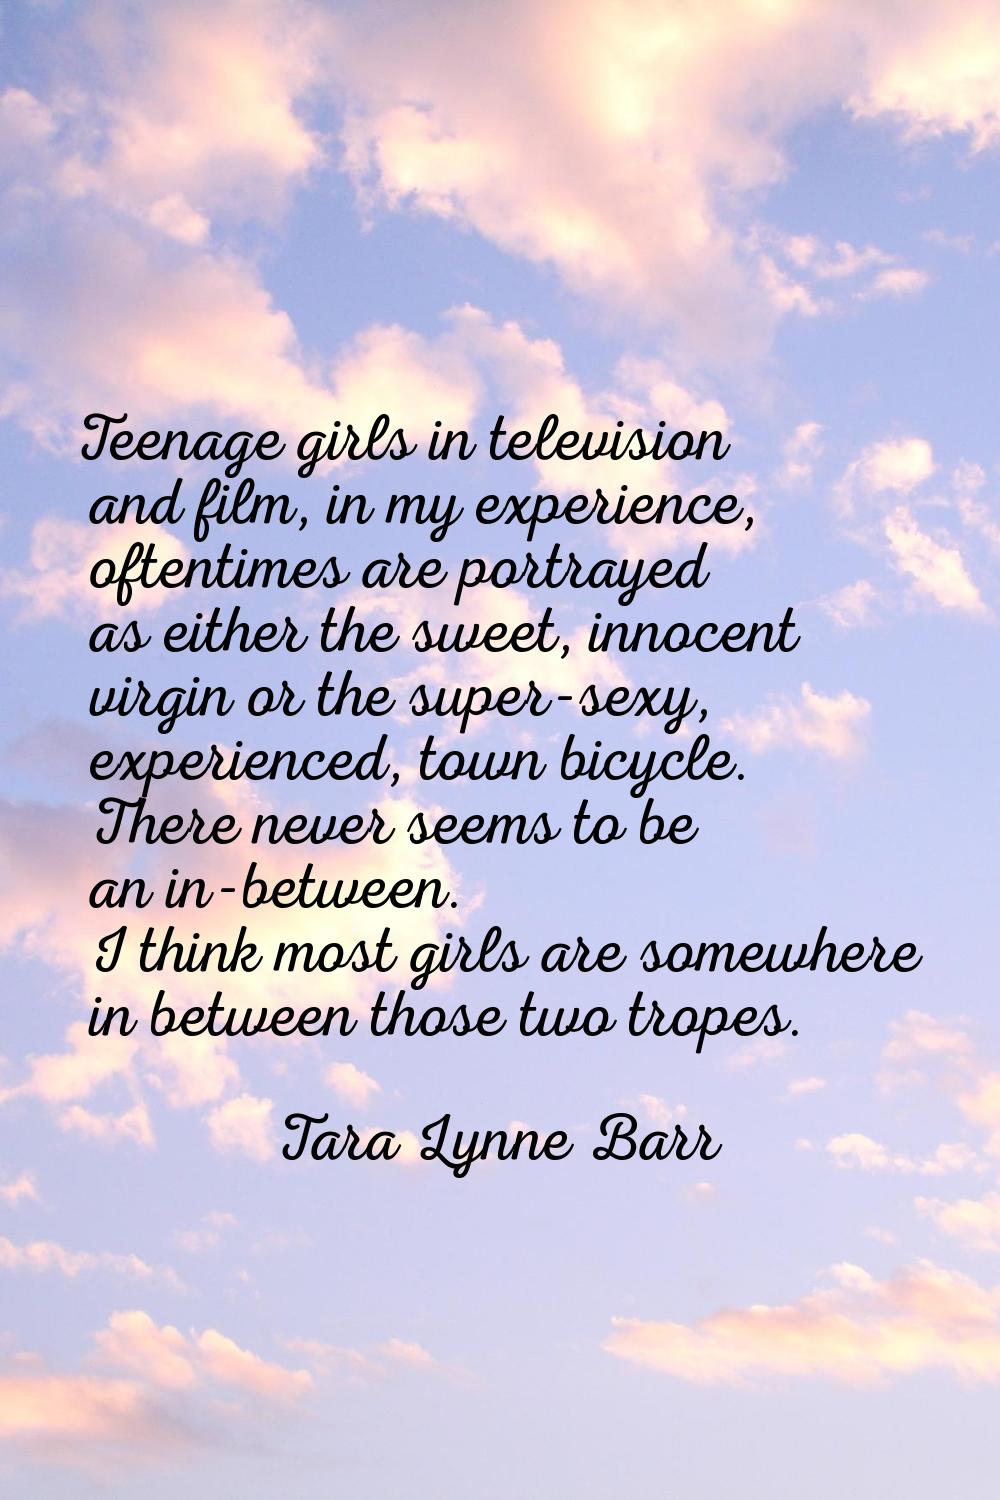 Teenage girls in television and film, in my experience, oftentimes are portrayed as either the swee